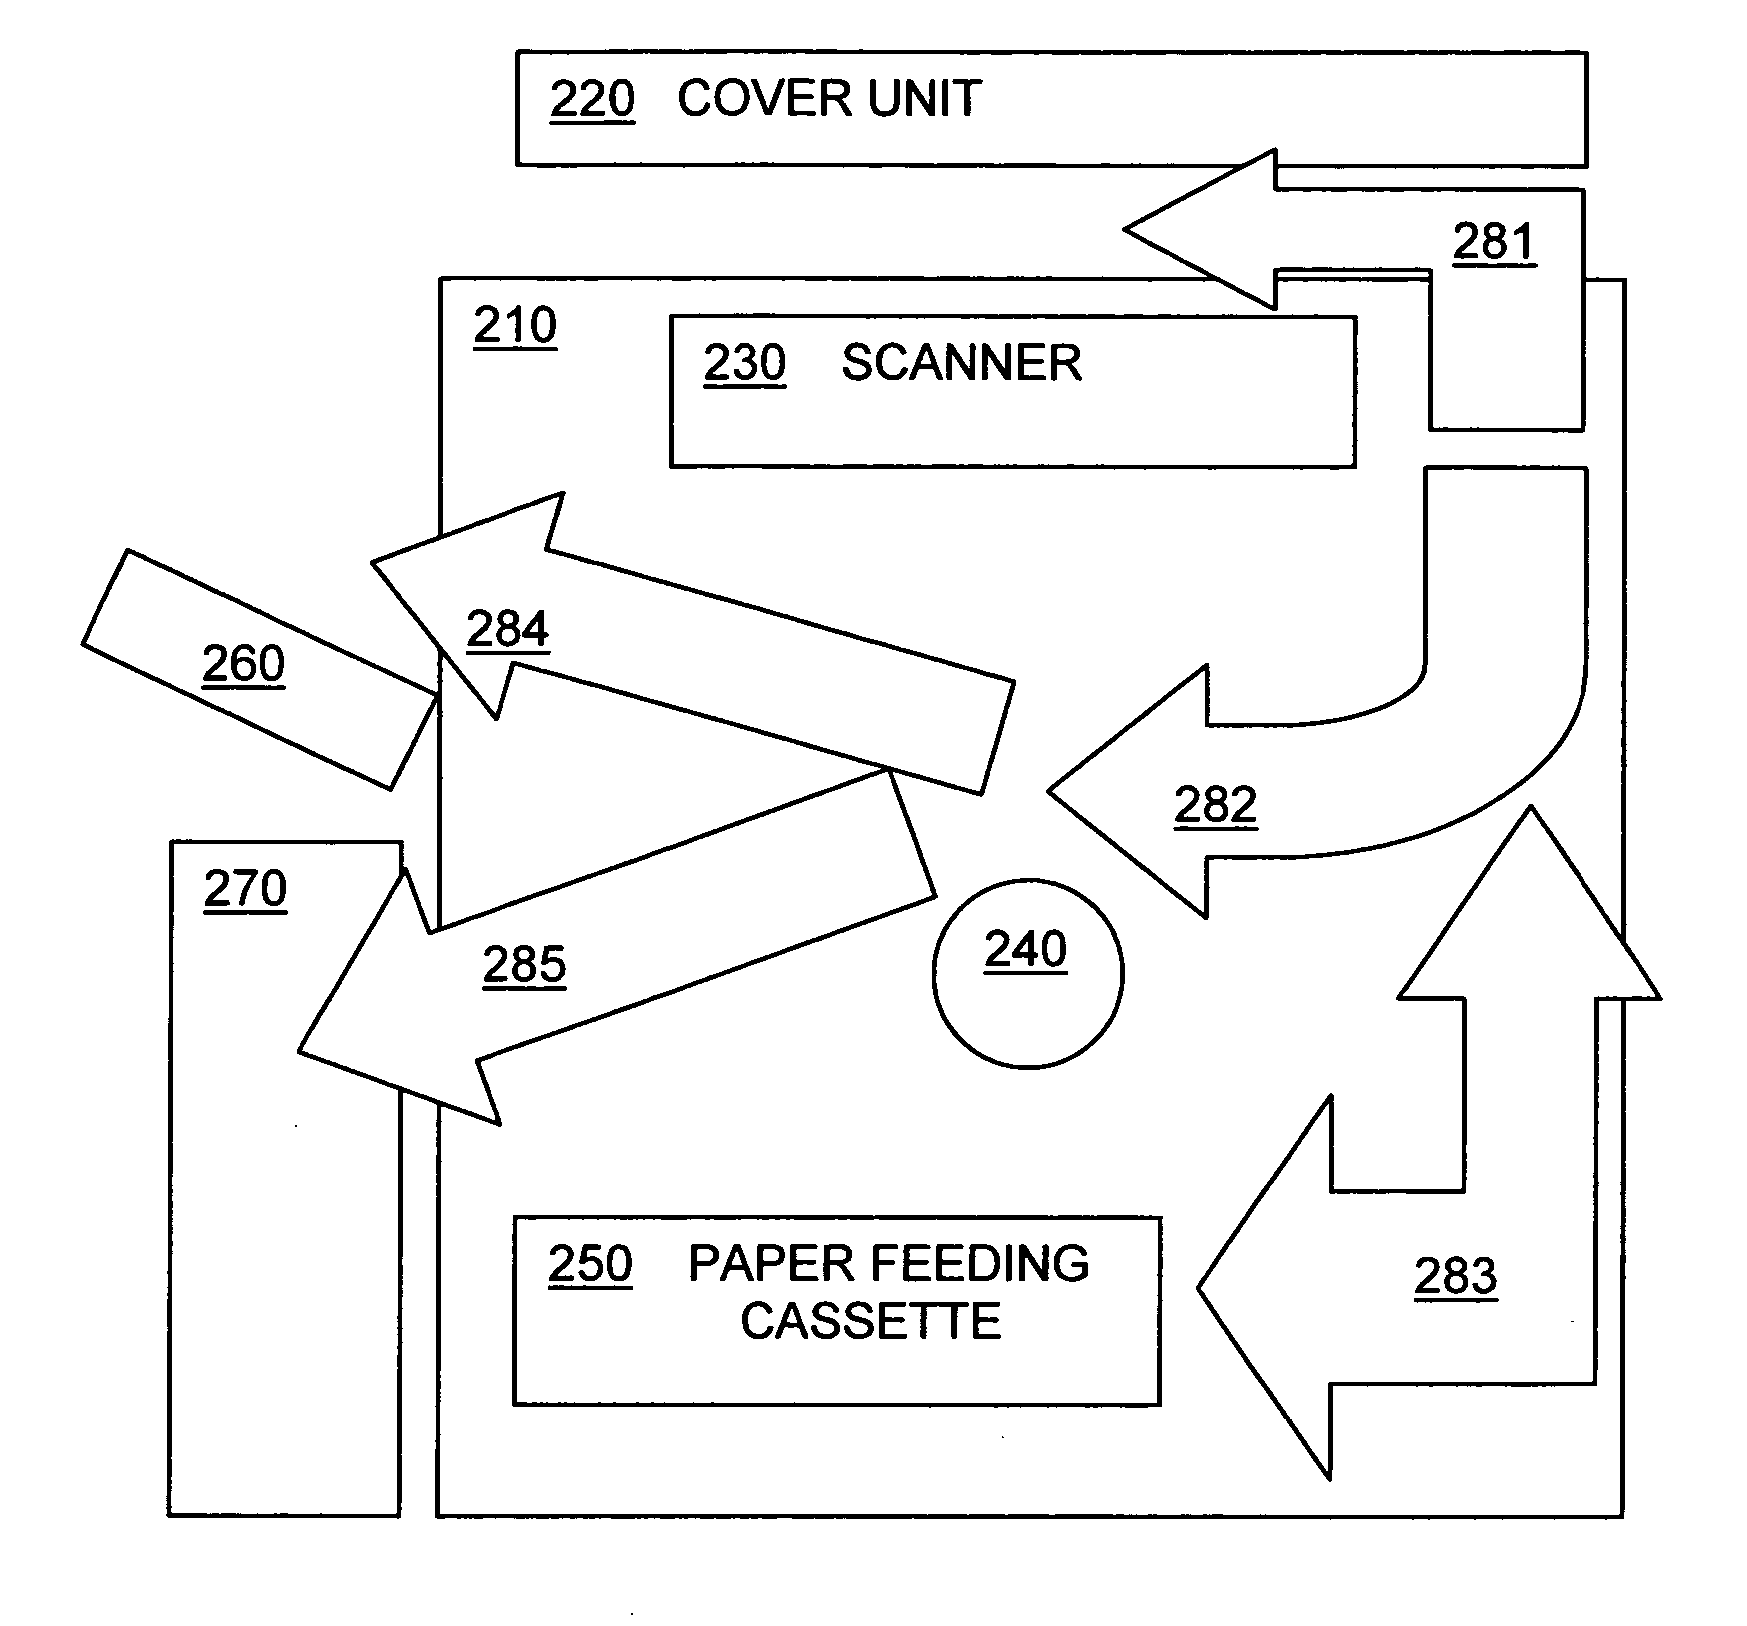 System for scanning recycled paper before printing